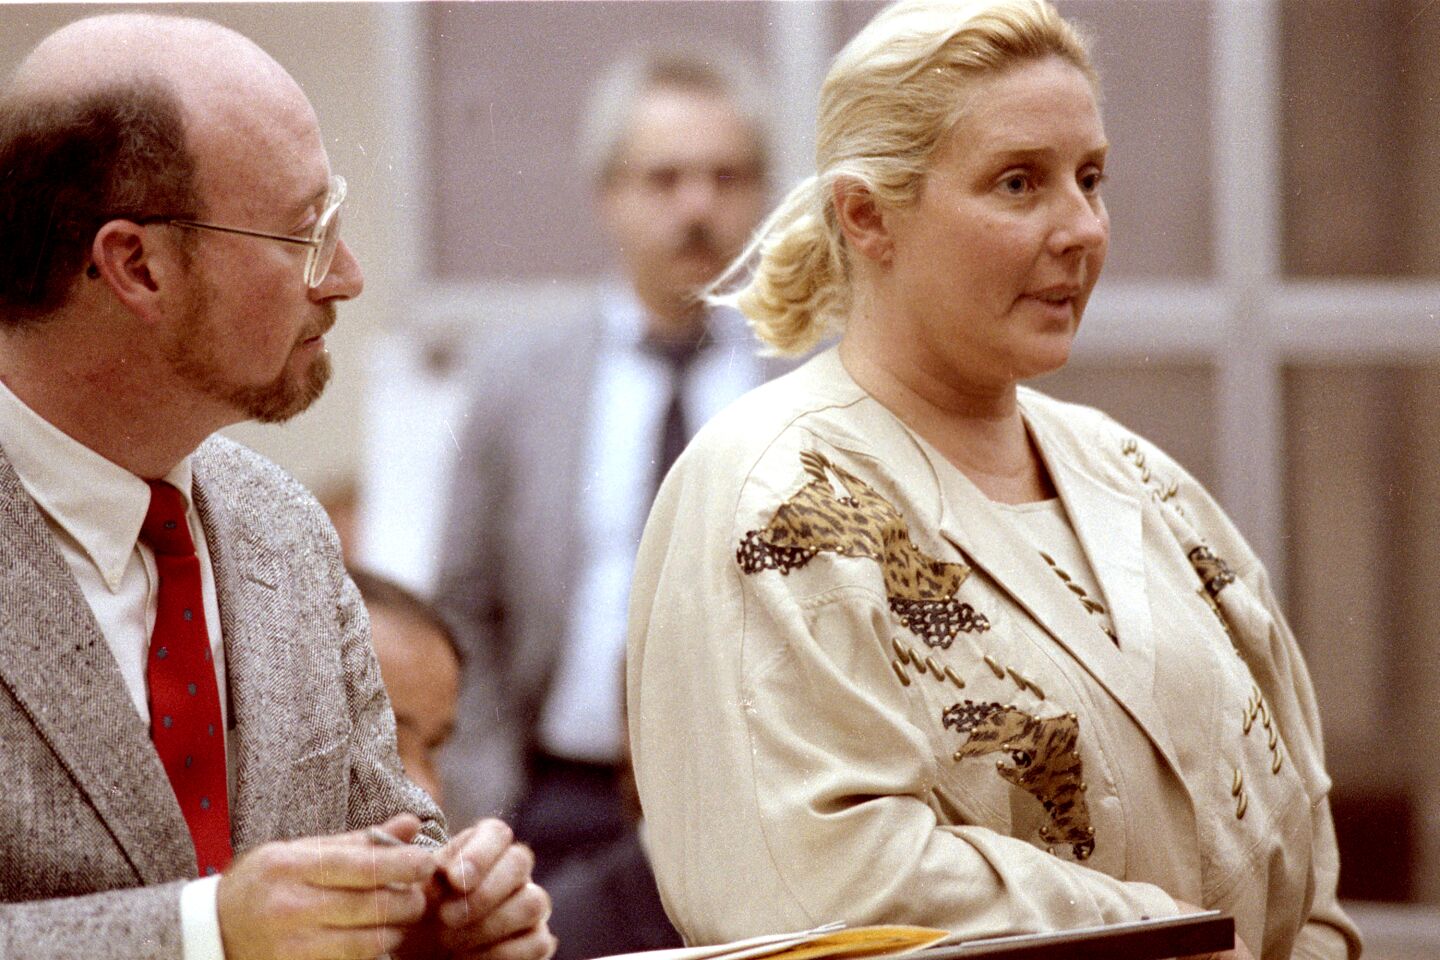 Broderick pleads not guilty on Nov. 15, 1989. With her is attorney Mark Wolf.